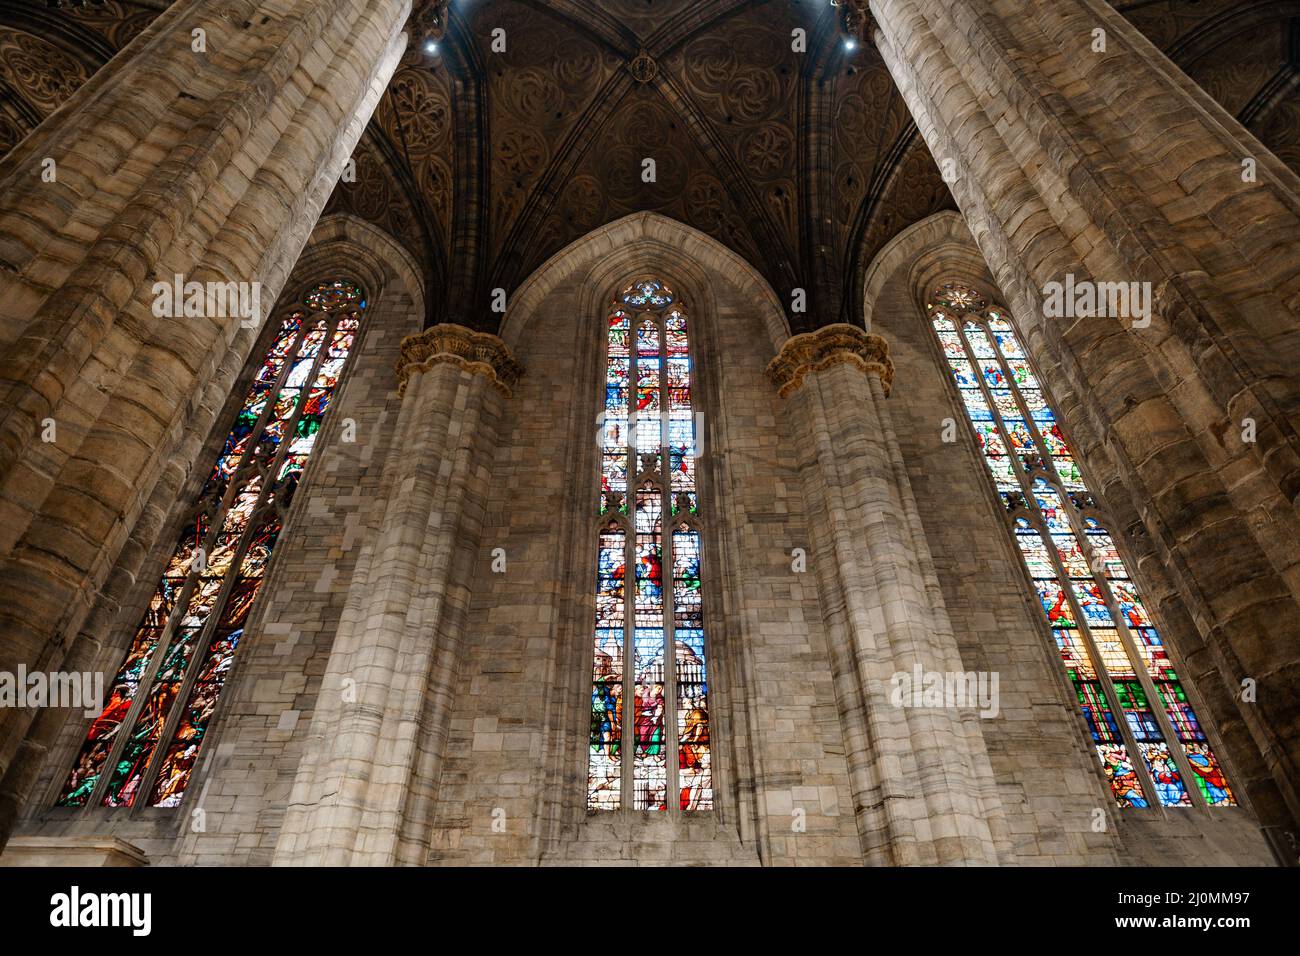 Multi-colored stained glass windows on the walls of the Duomo. Italy, Milan Stock Photo